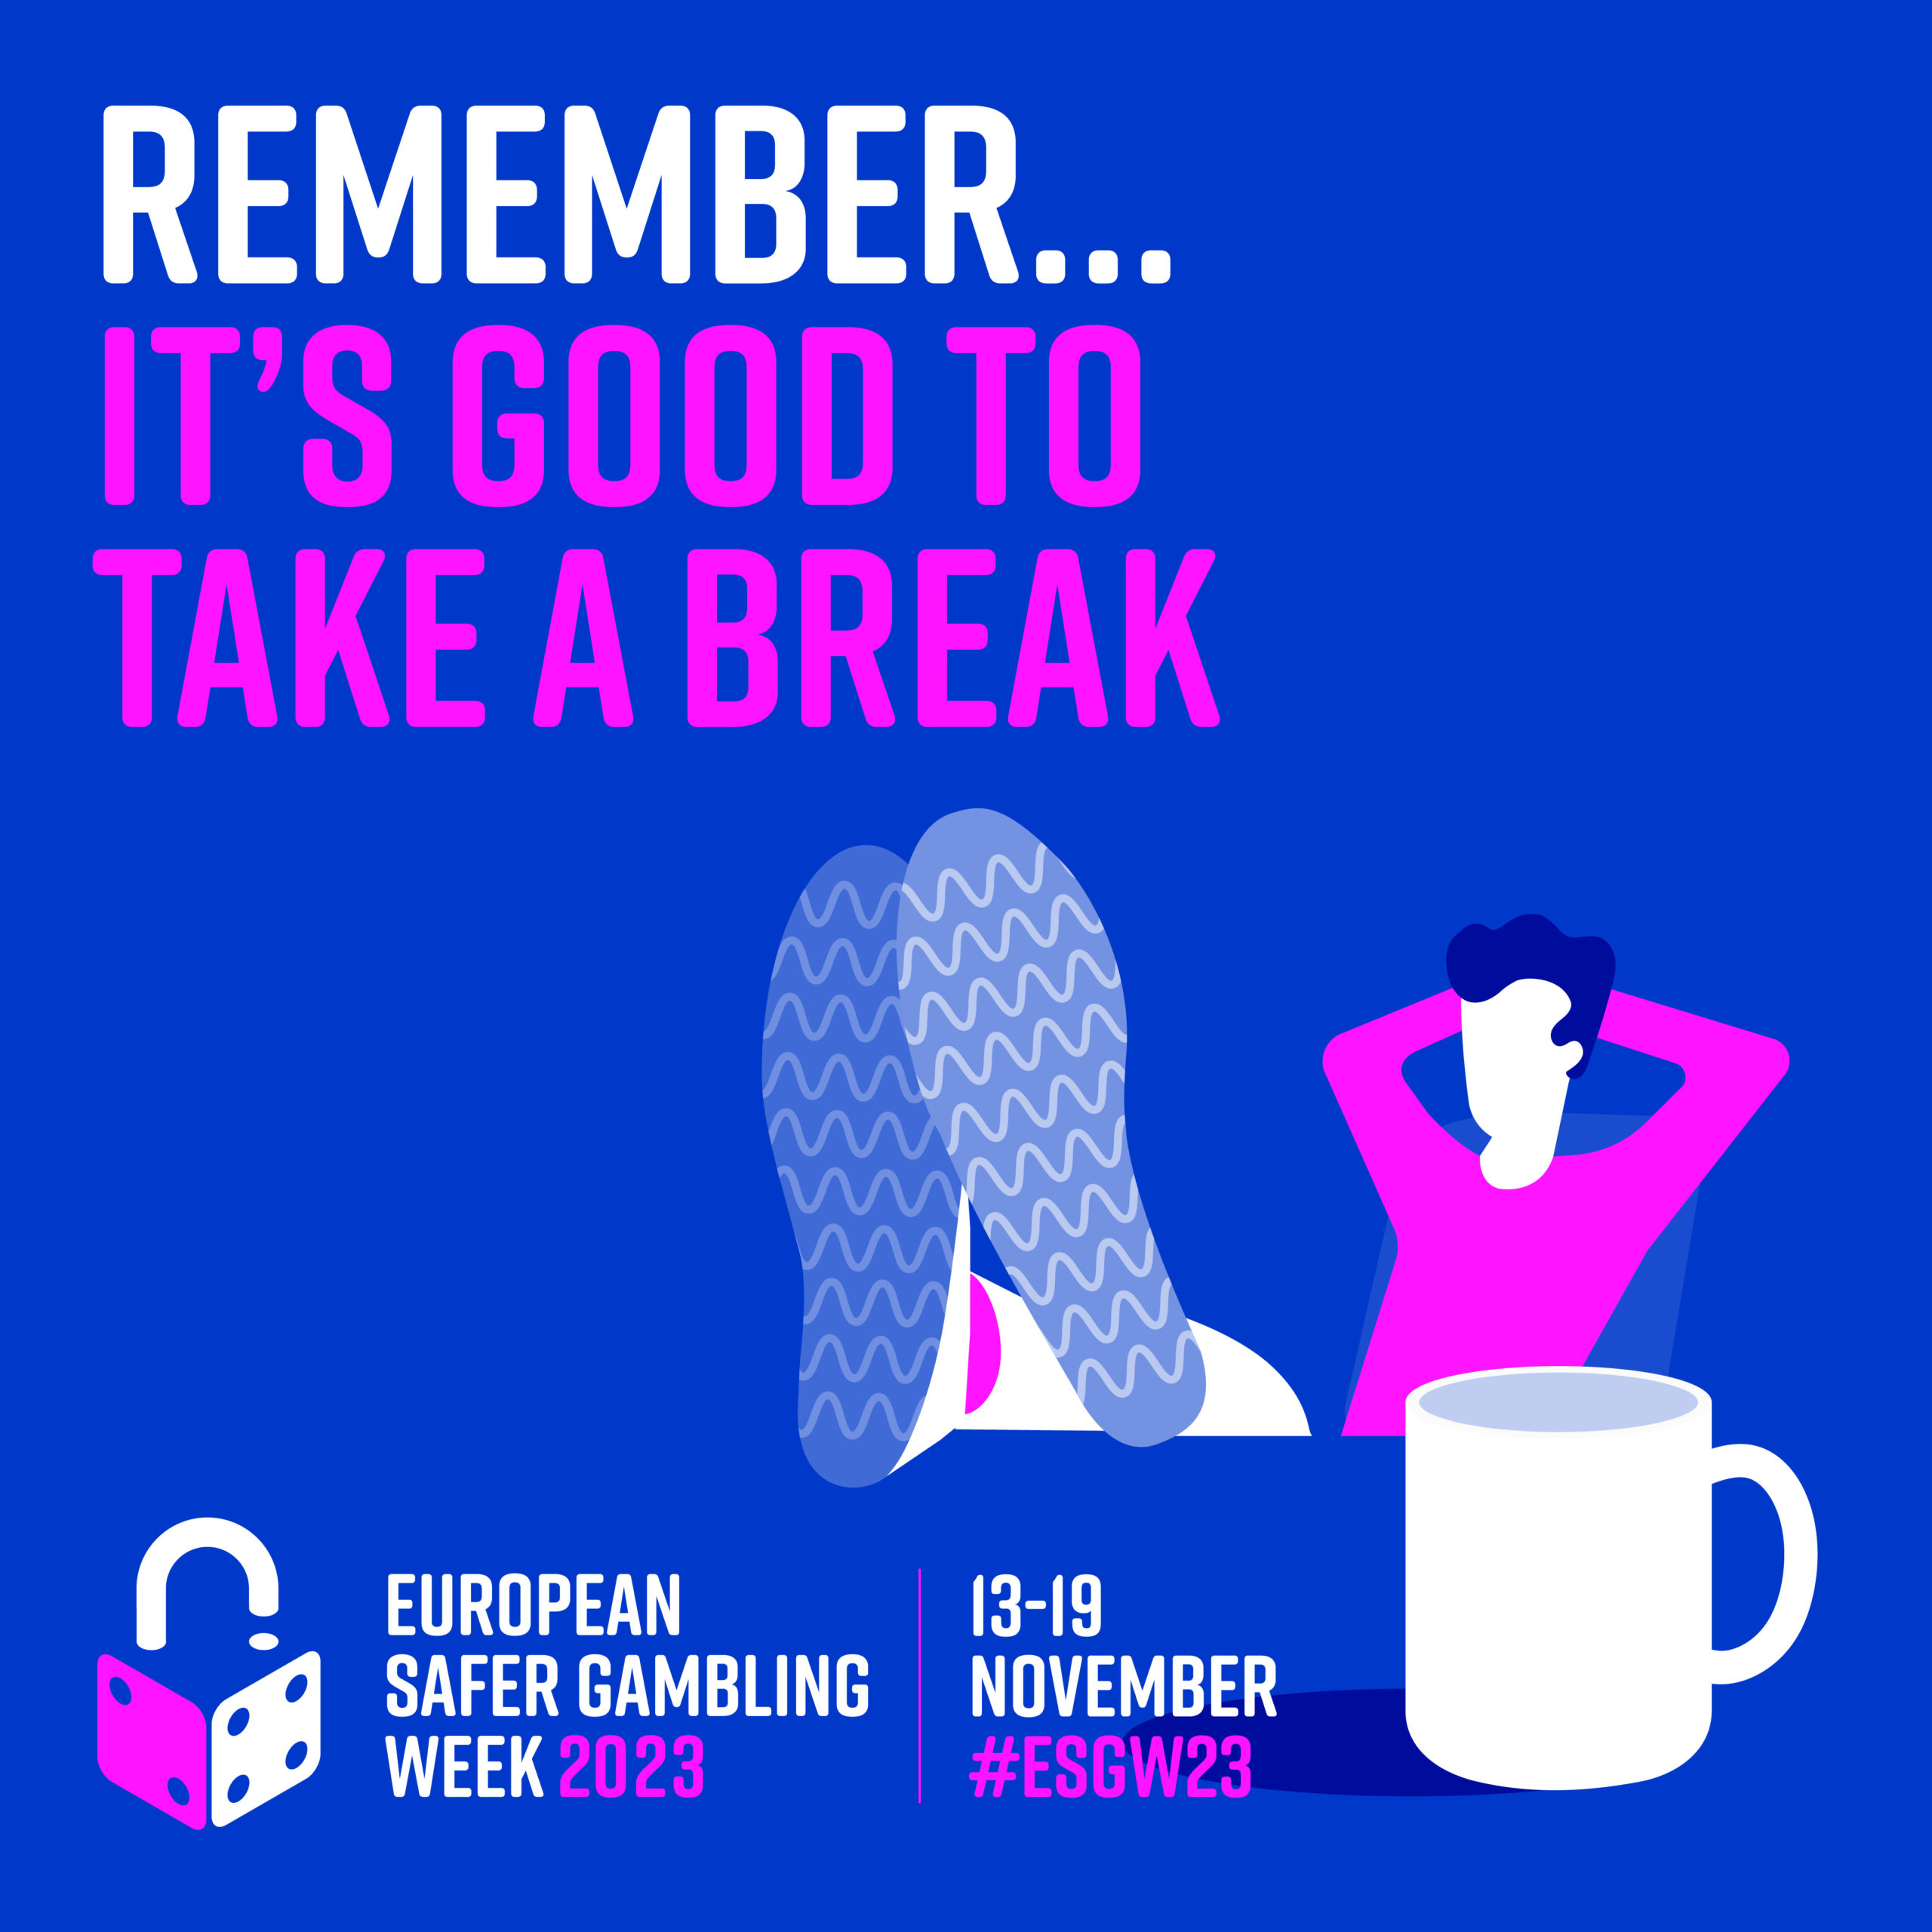 Five Things You Need to Know About European Safer Gambling Week